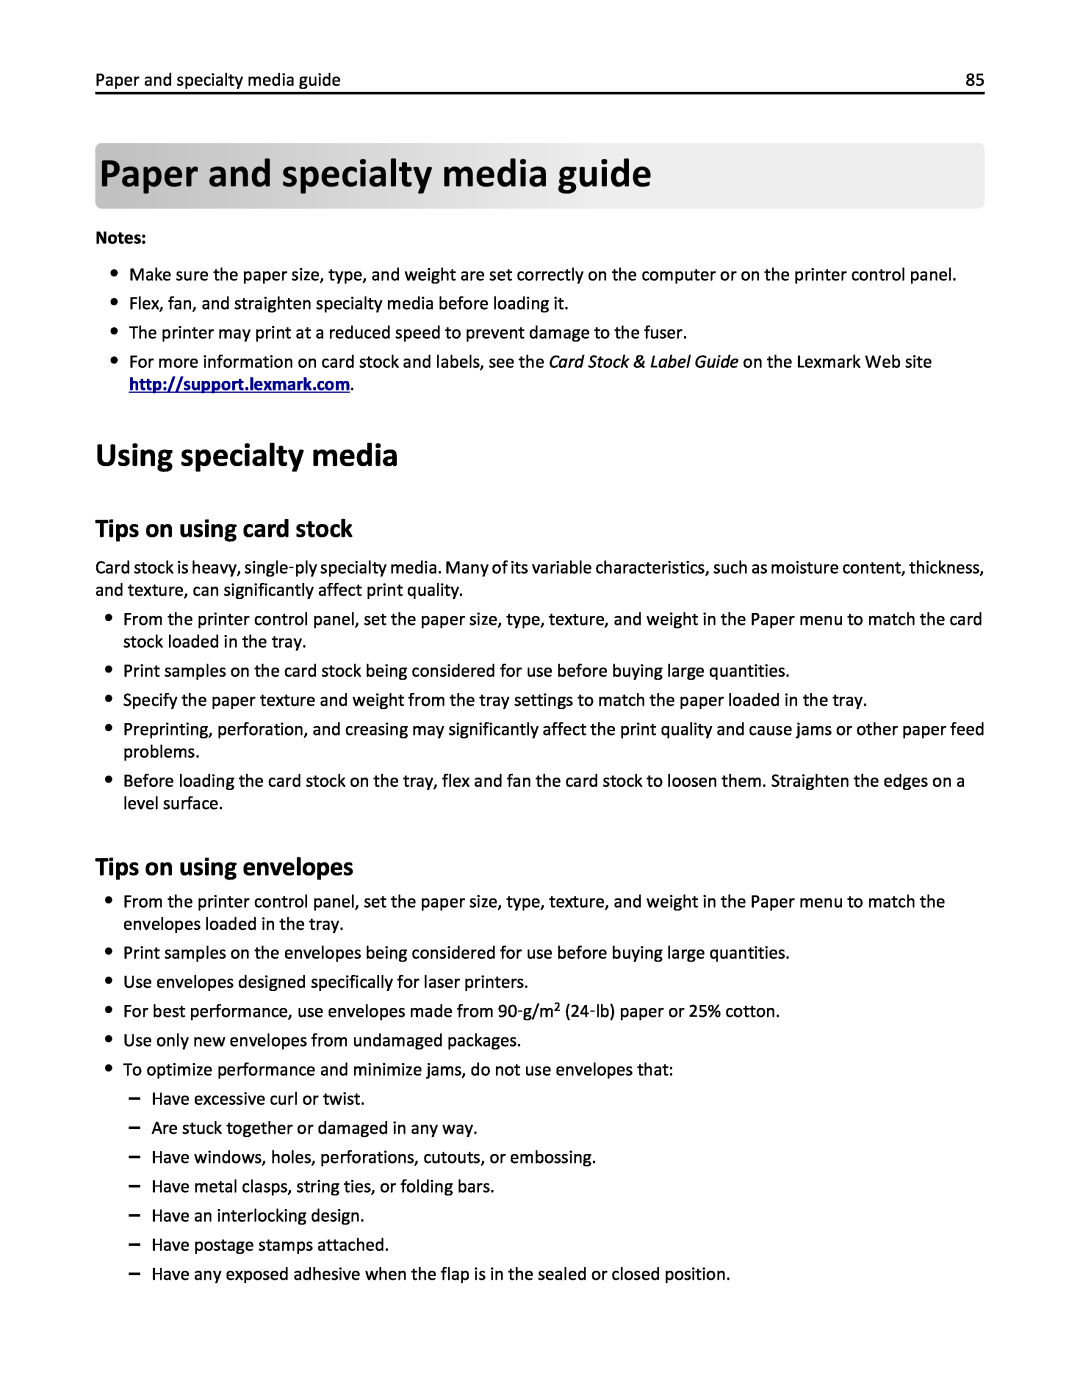 Lexmark MX710DHE Paper andspecialtymedia guide, Using specialty media, Tips on using card stock, Tips on using envelopes 